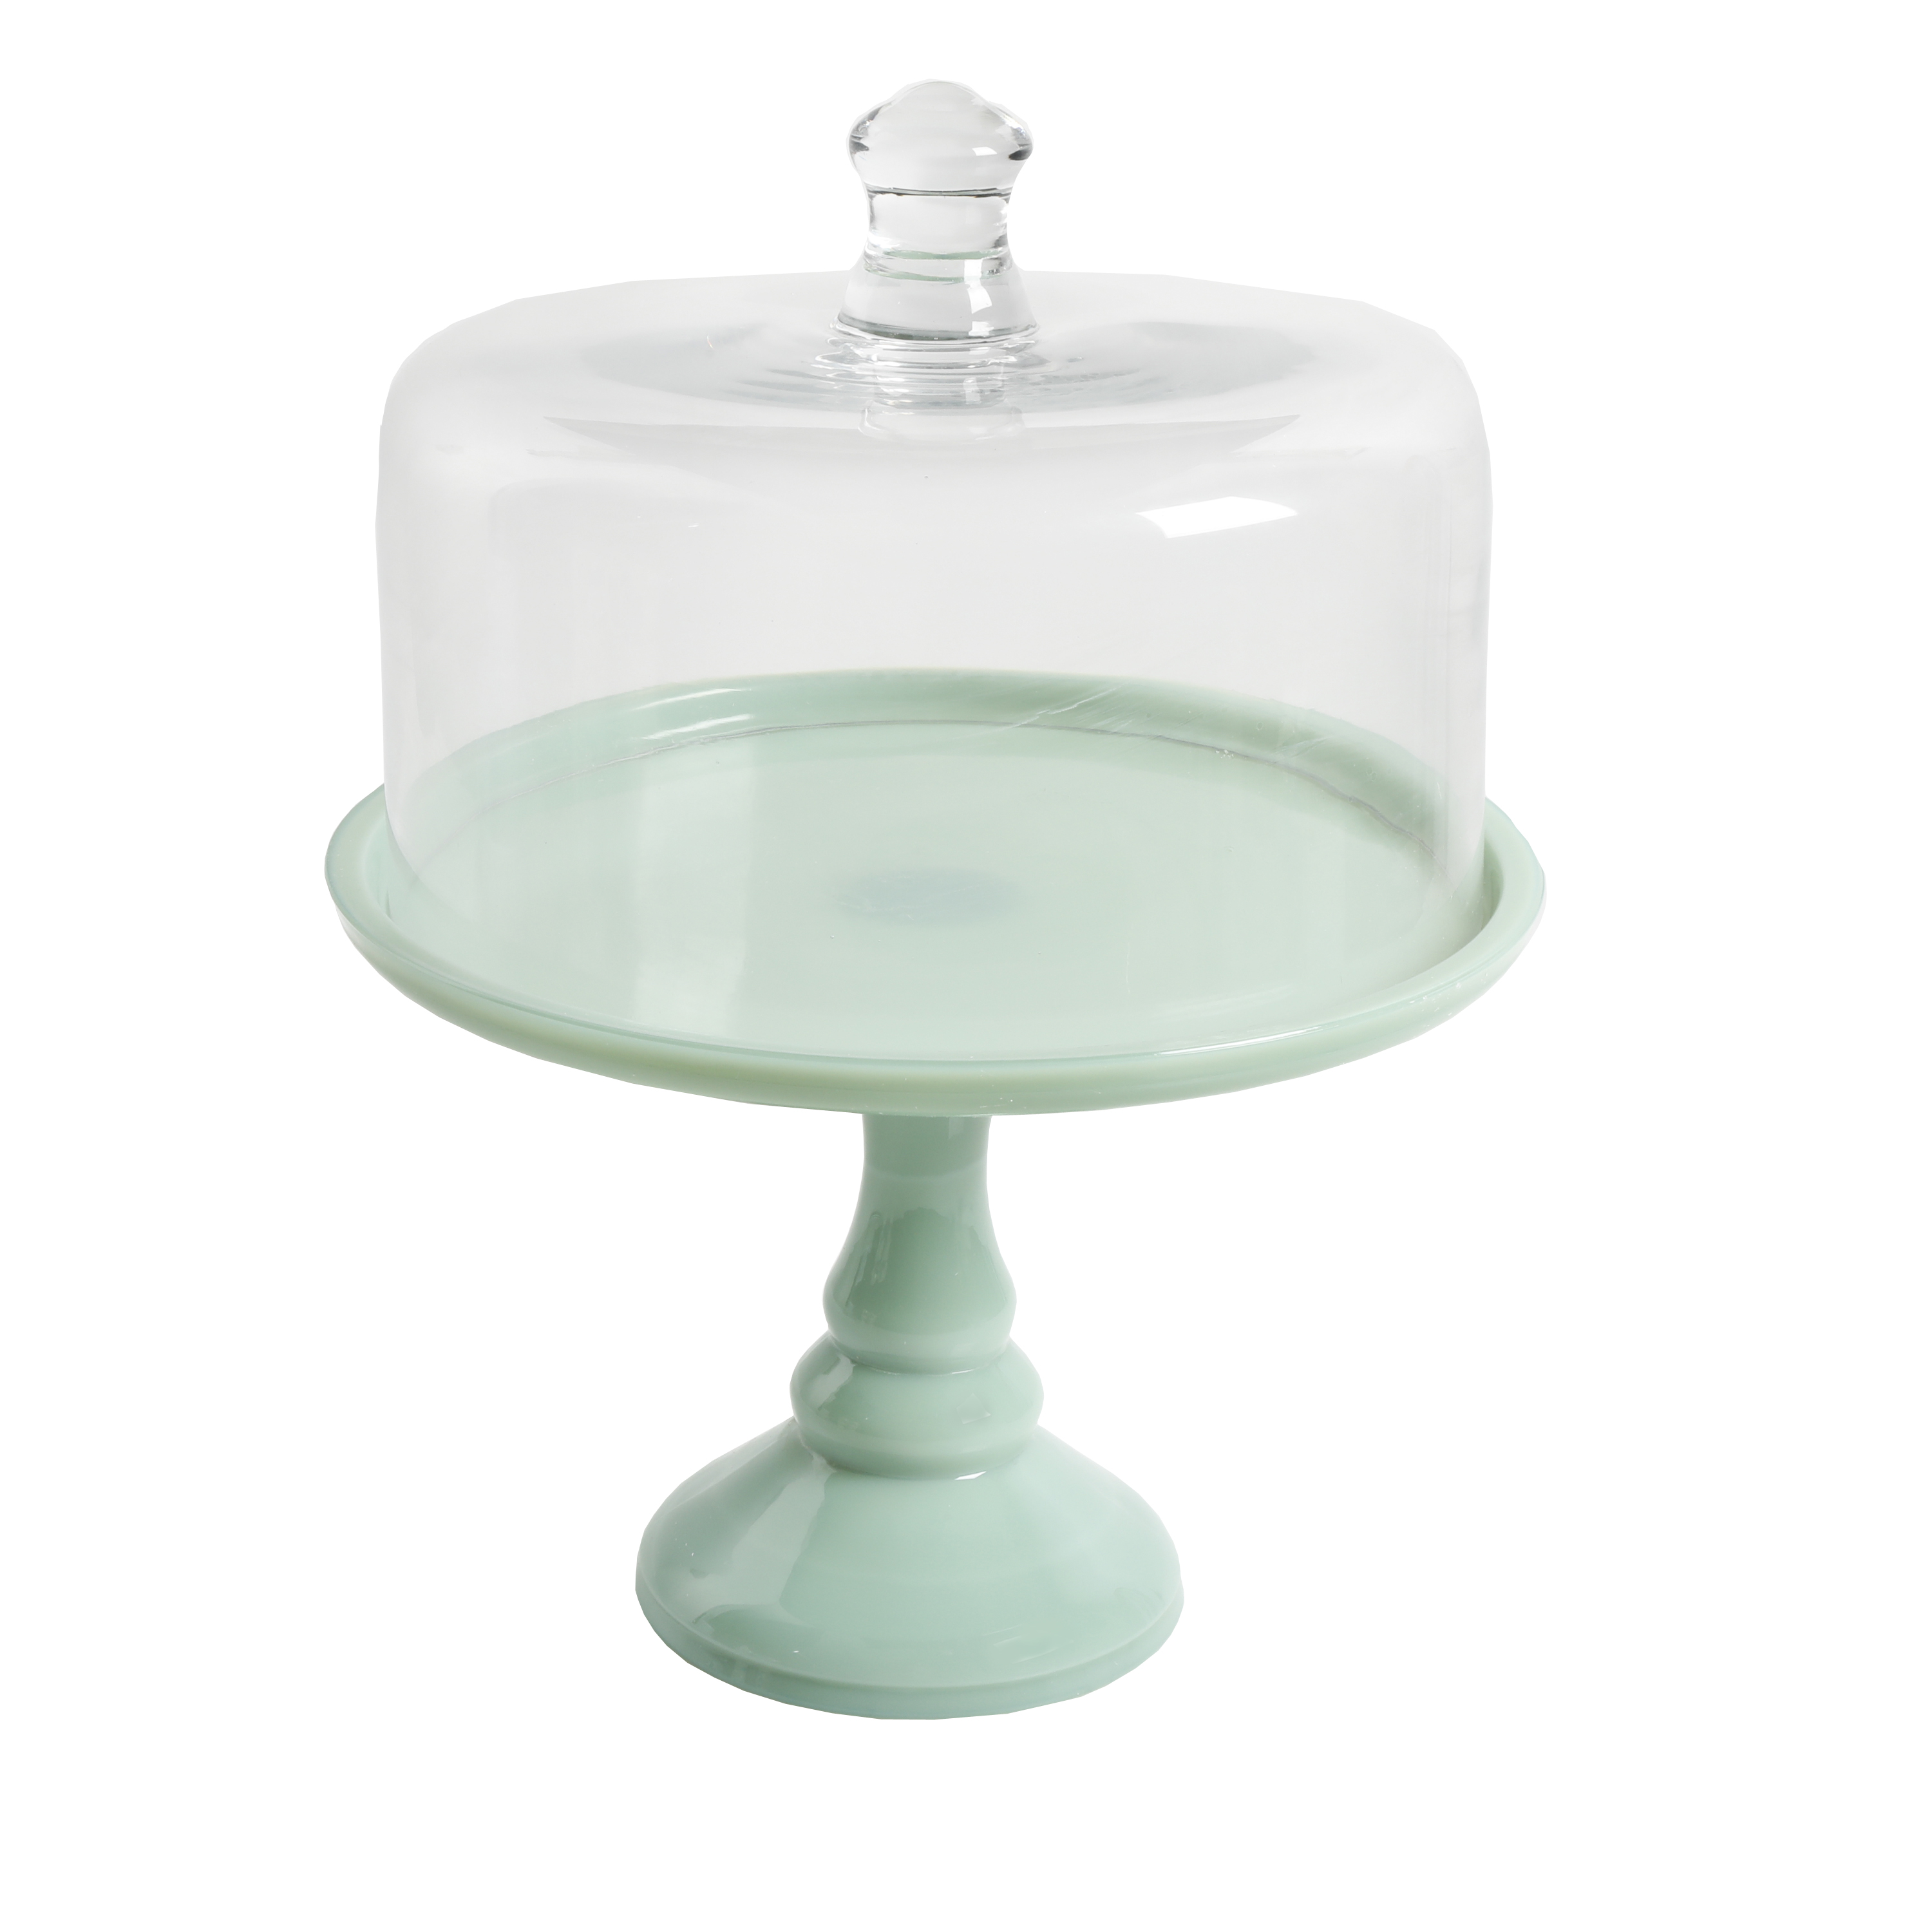 The Pioneer Woman Timeless Beauty 10-inch Cake Stand with Glass Cover, Mint Green - image 3 of 5